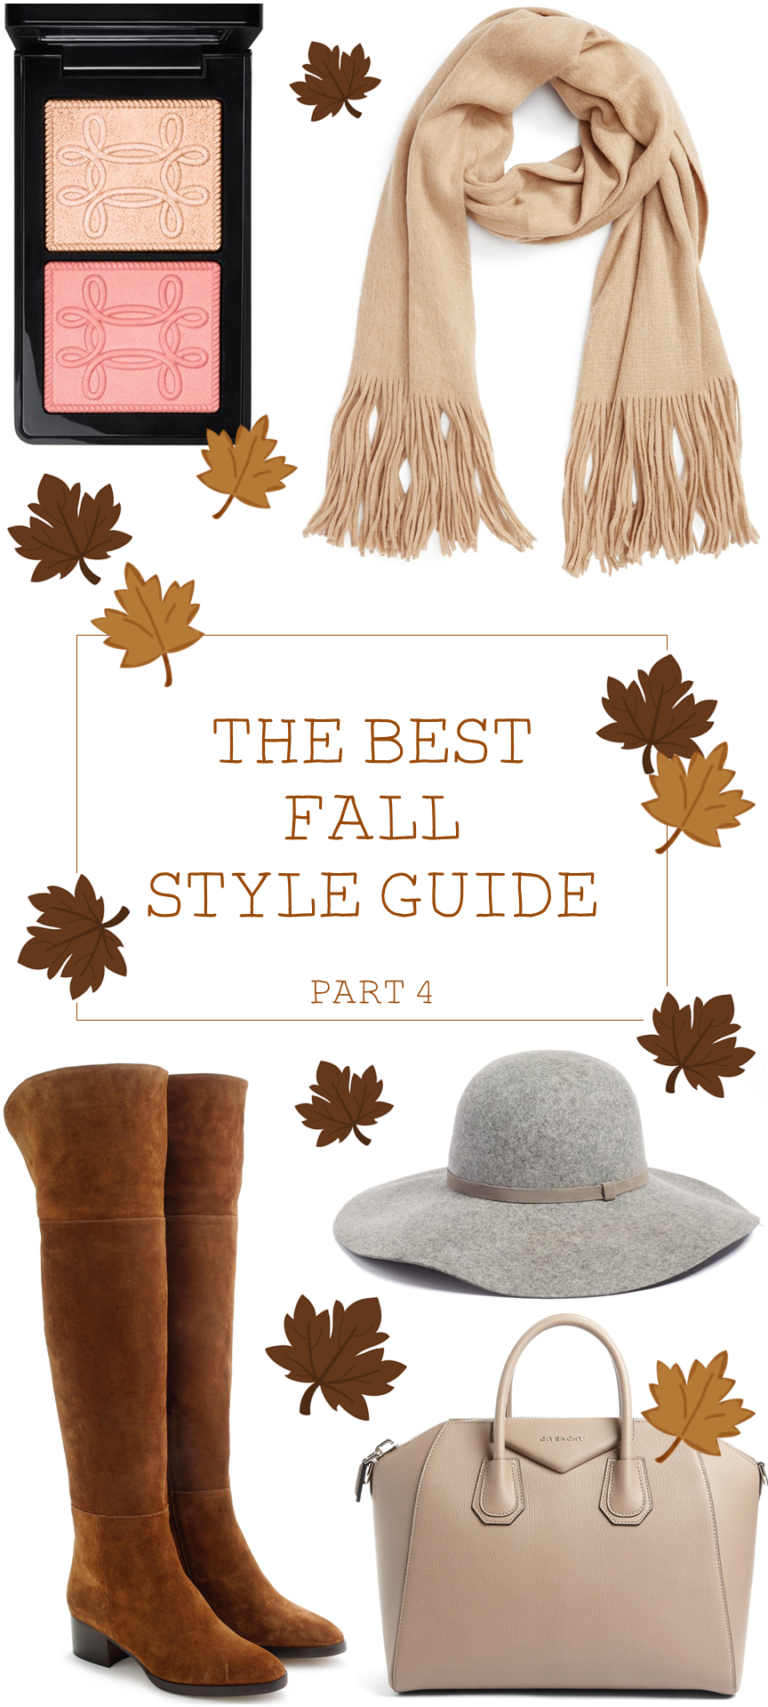 THE BEST FALL STYLE GUIDE PART 4 - Beautifully Seaside